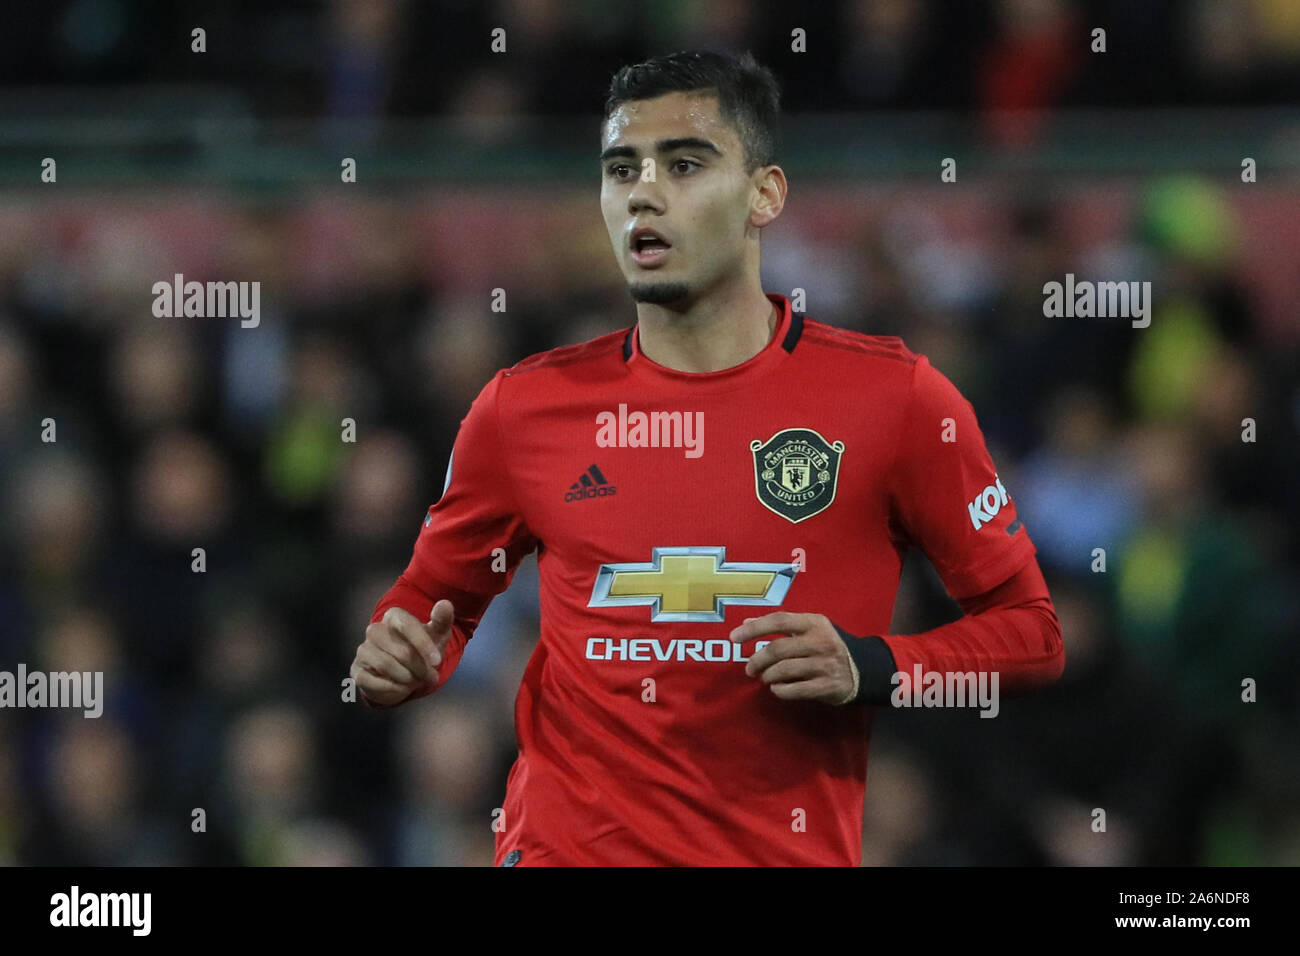 27th October 2019, Carrow Road, Norwich, England; Premier League, Norwich City v Manchester United : Andreas Pereira (15) of Manchester United during the game Credit: Mark Cosgrove/News Images Stock Photo